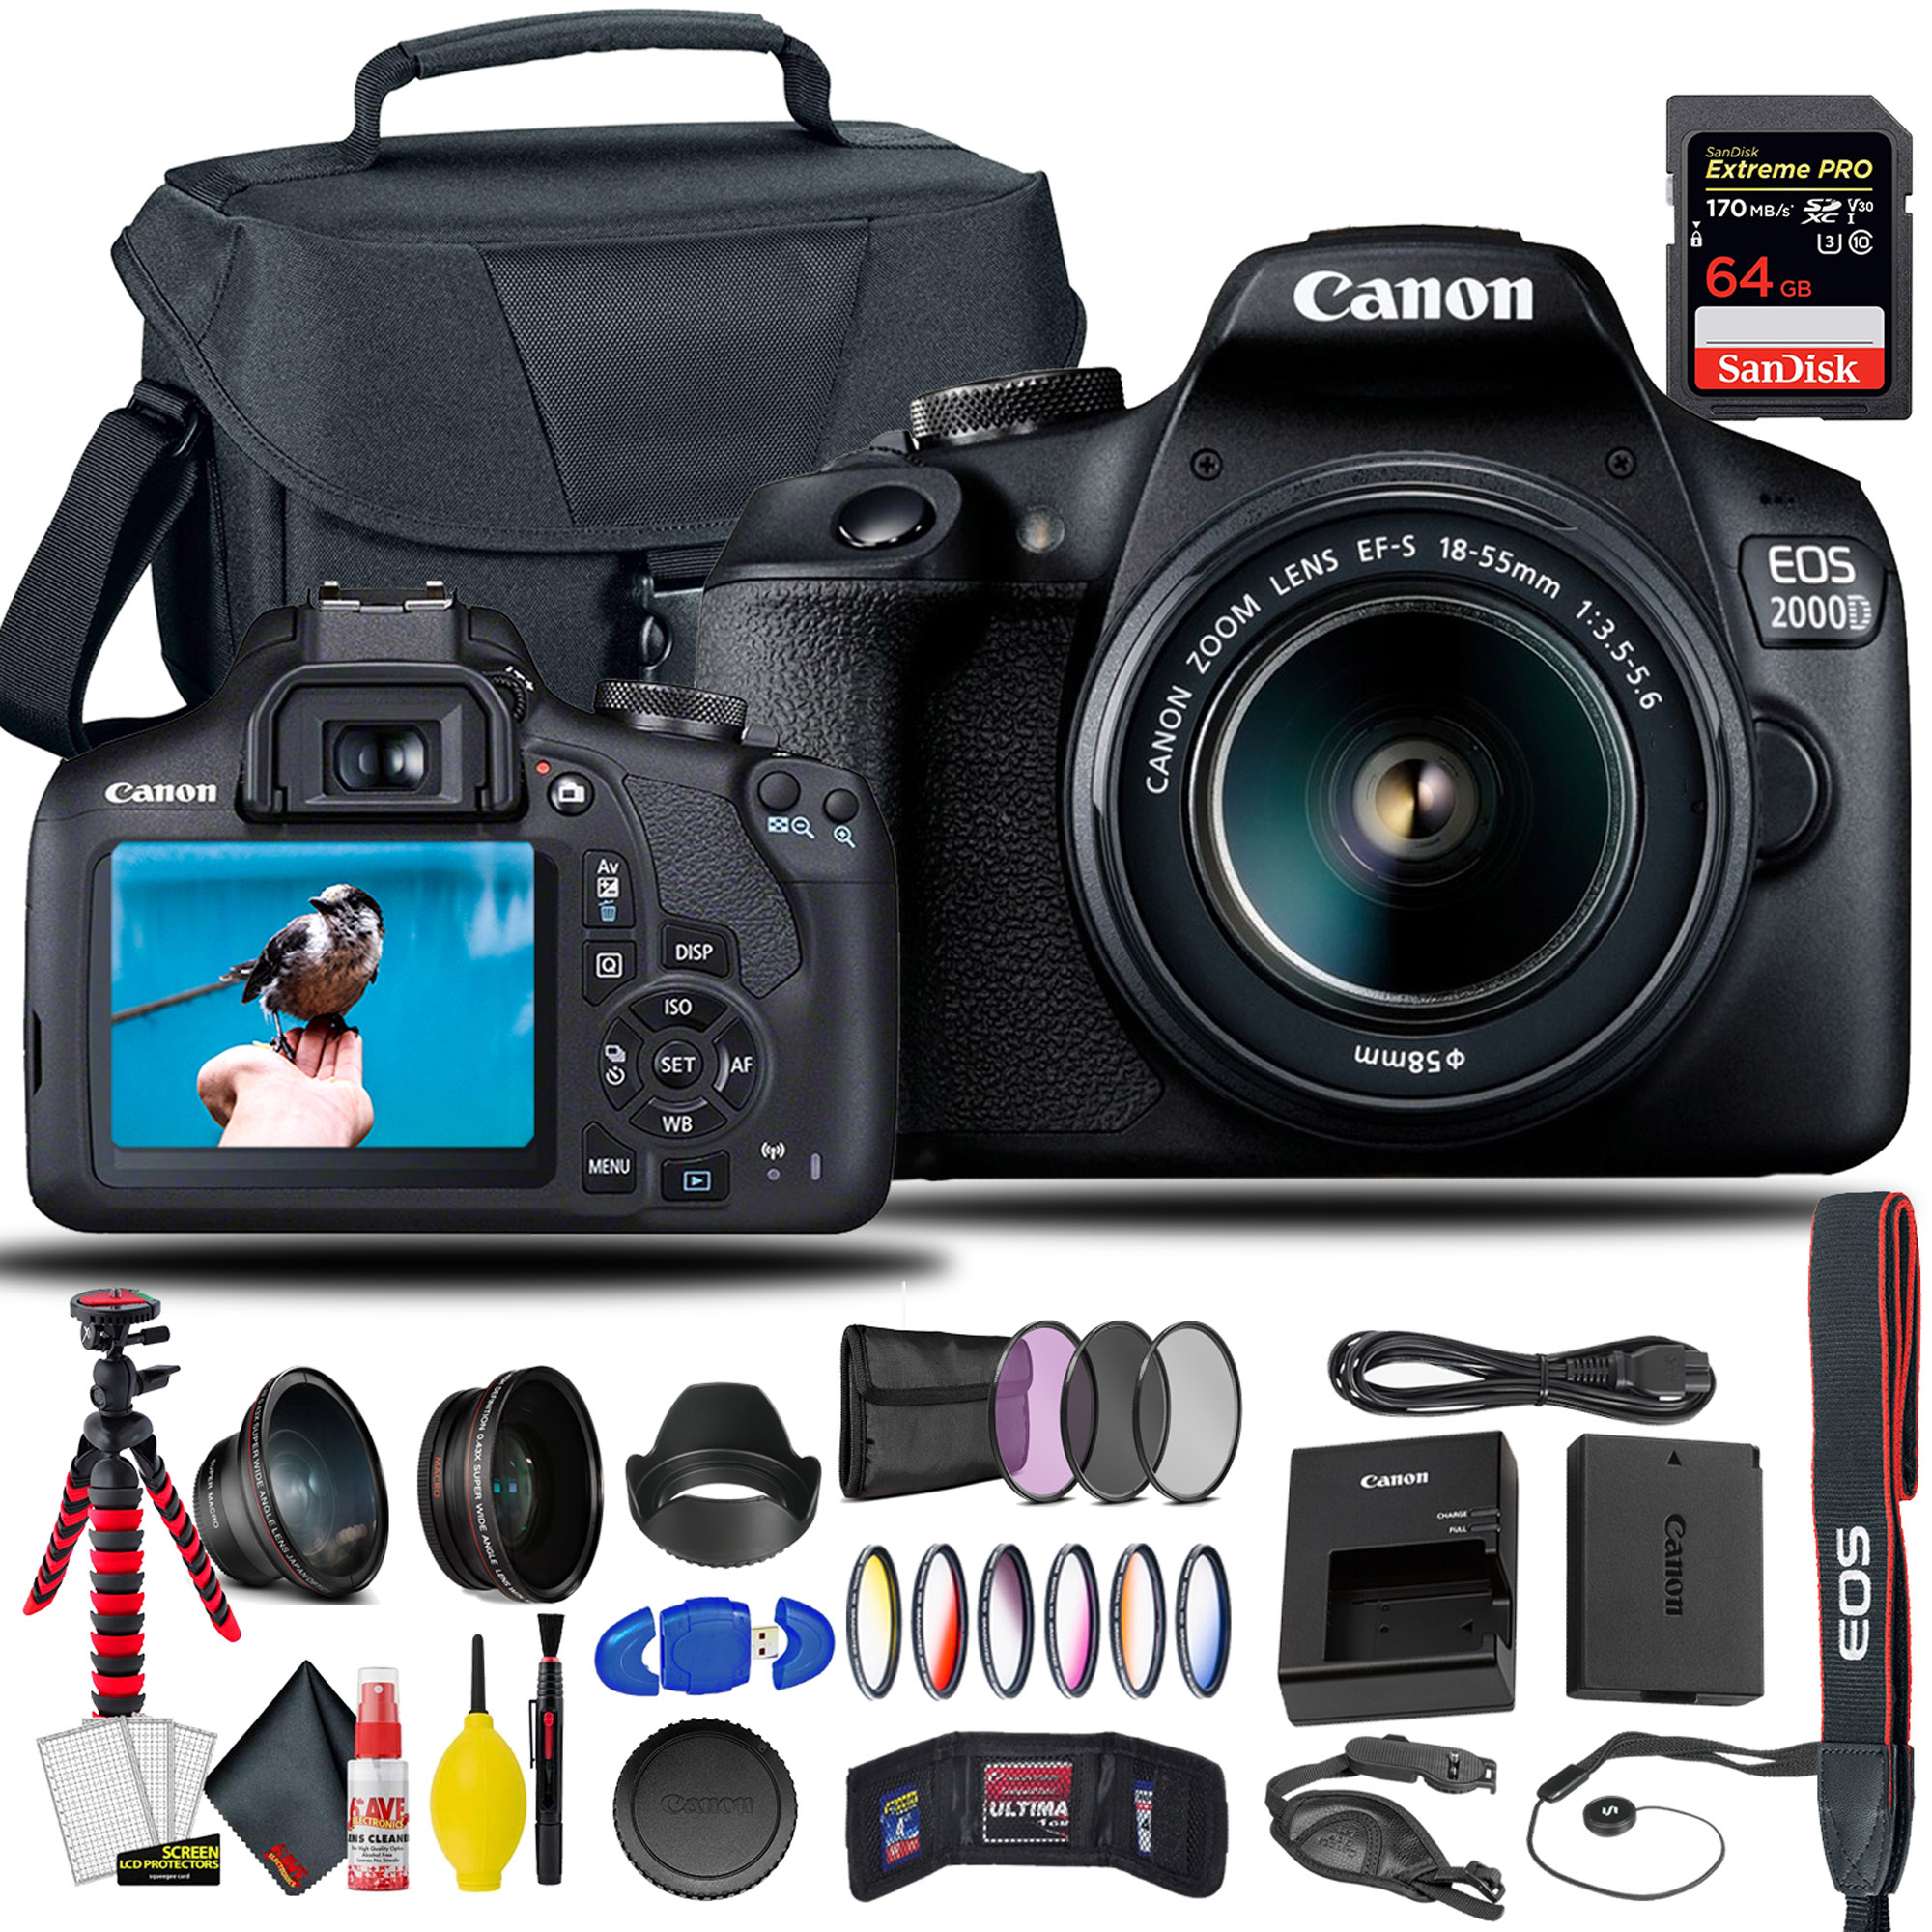 Canon EOS 2000D / Rebel T7 DSLR Camera With 18-55mm Lens +  Sandisk Extreme Pro 64GB Card + Creative Filters + EOS Camera Bag + Cleaning Set, + More (International Model) - image 1 of 6